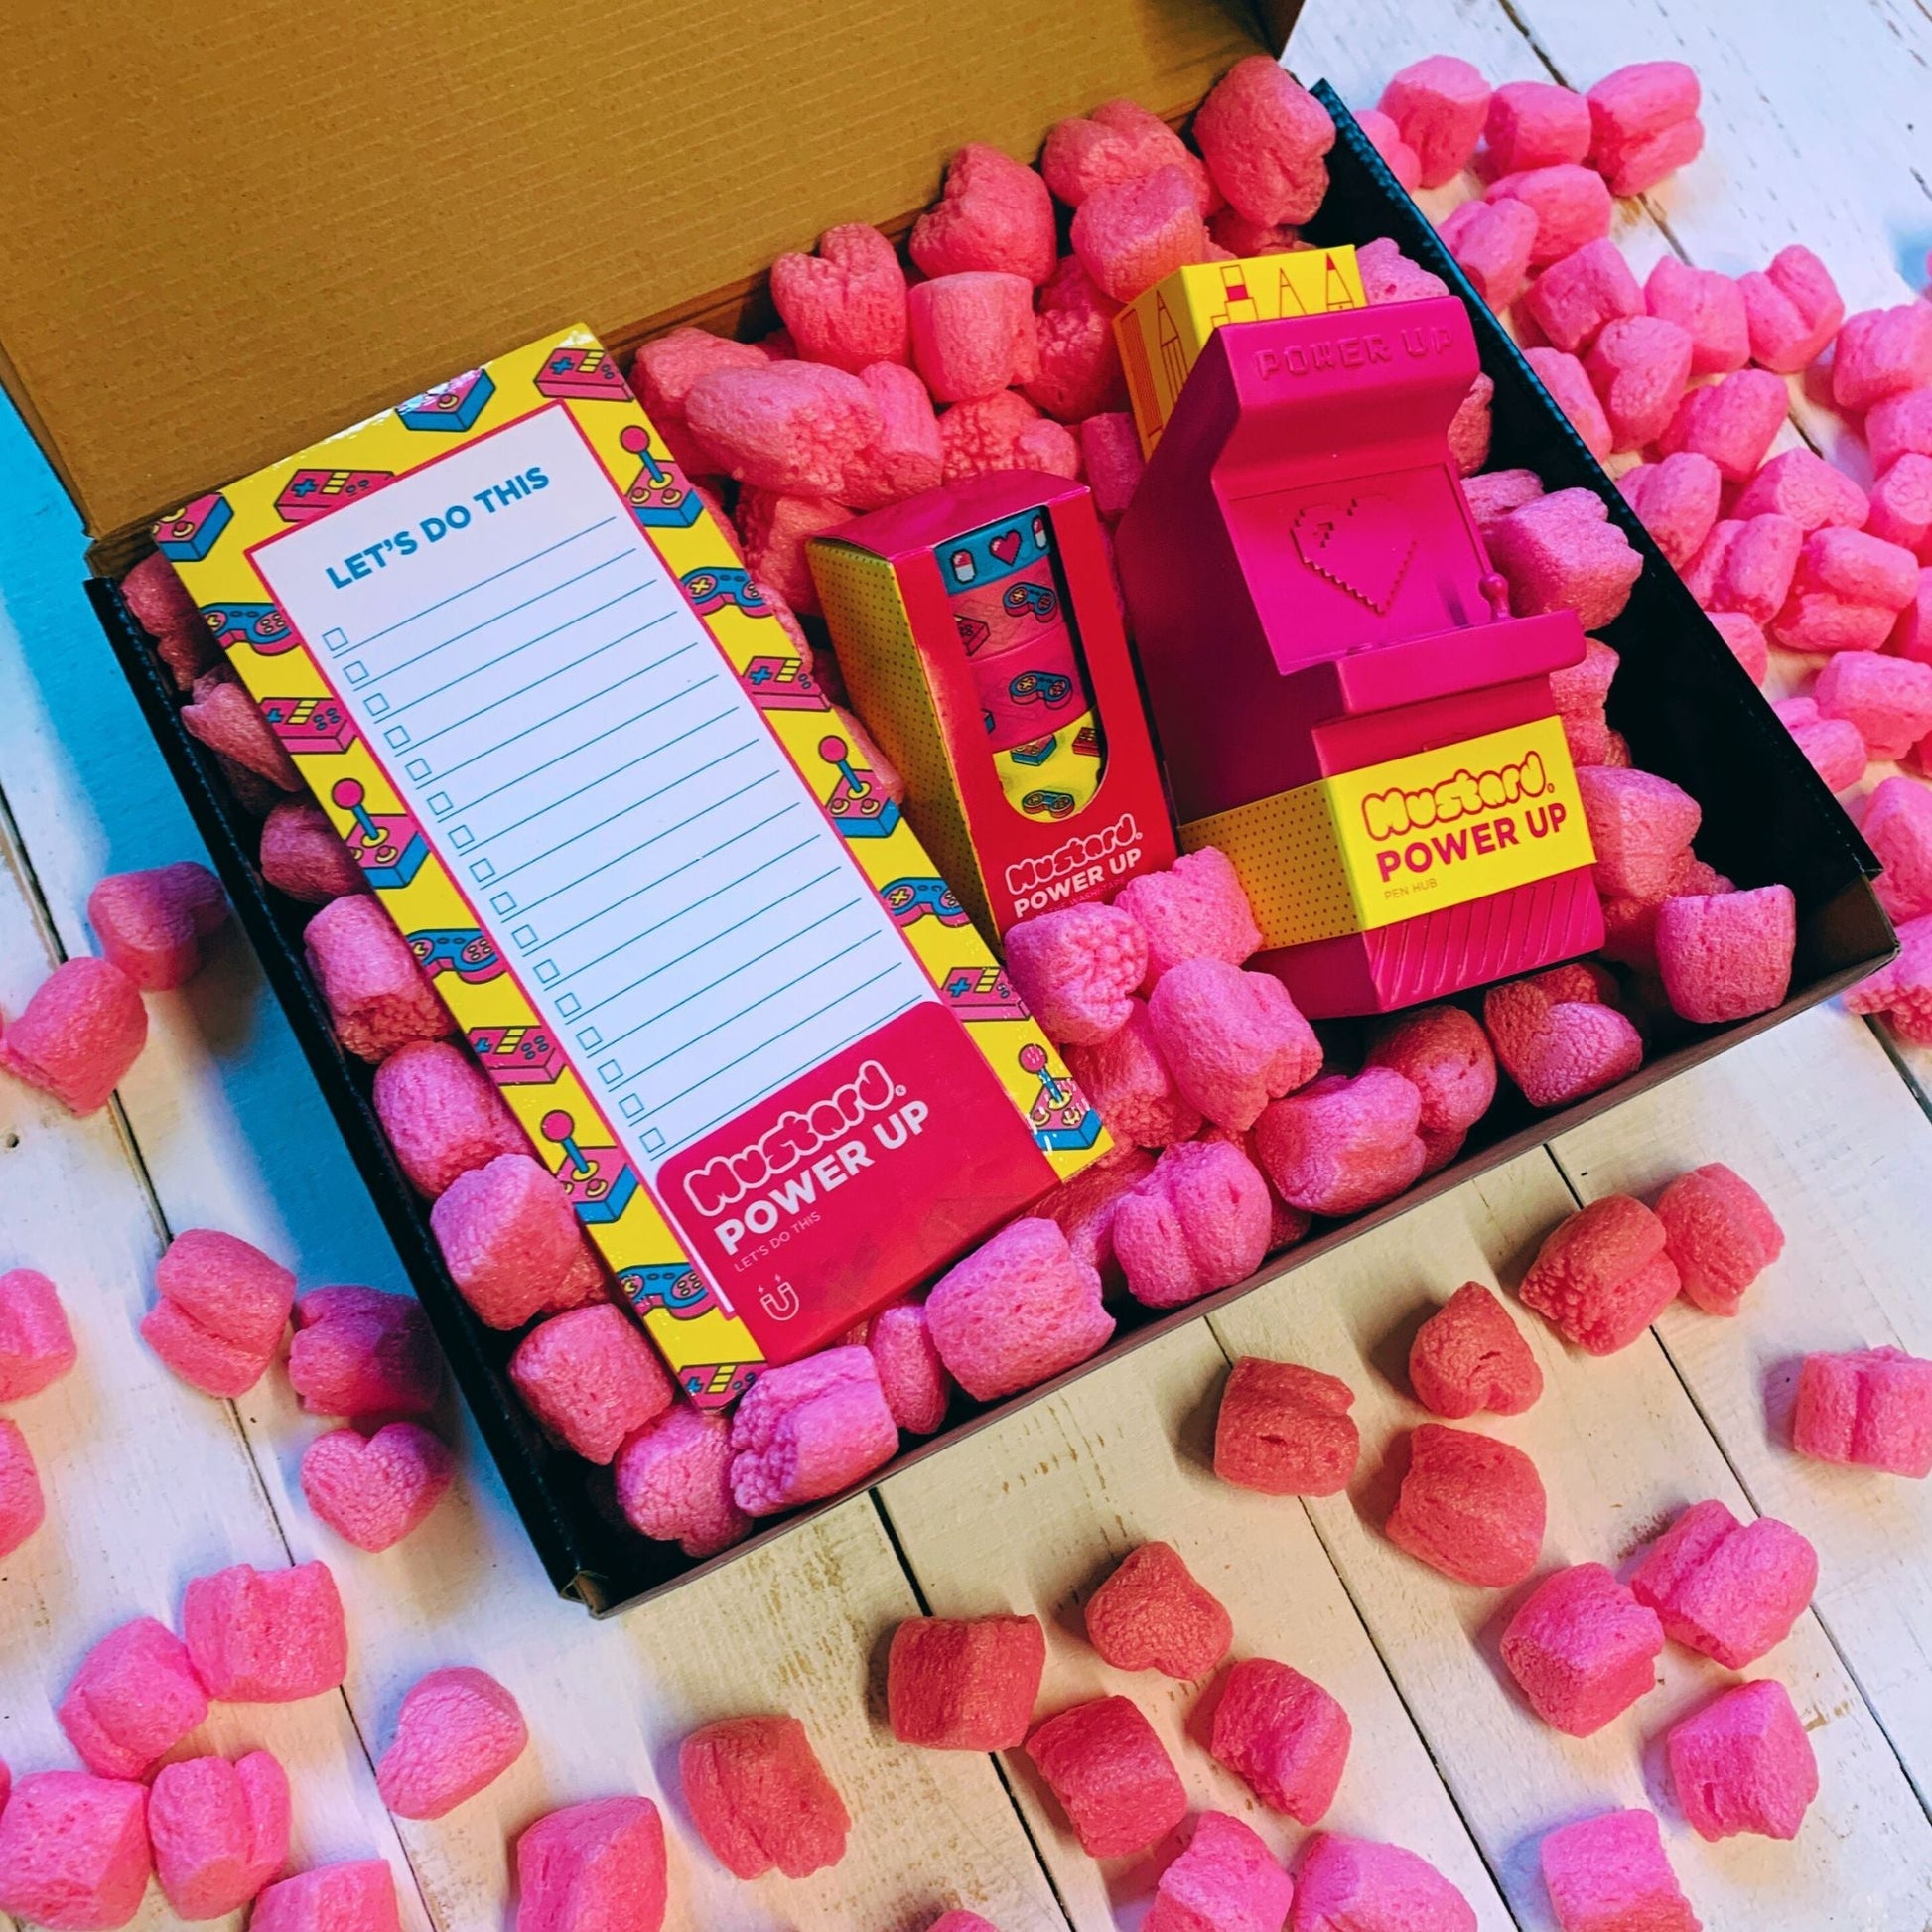 Power Up '90s Gamer Gift Box with Compostable Pink Heart Packing Peanuts